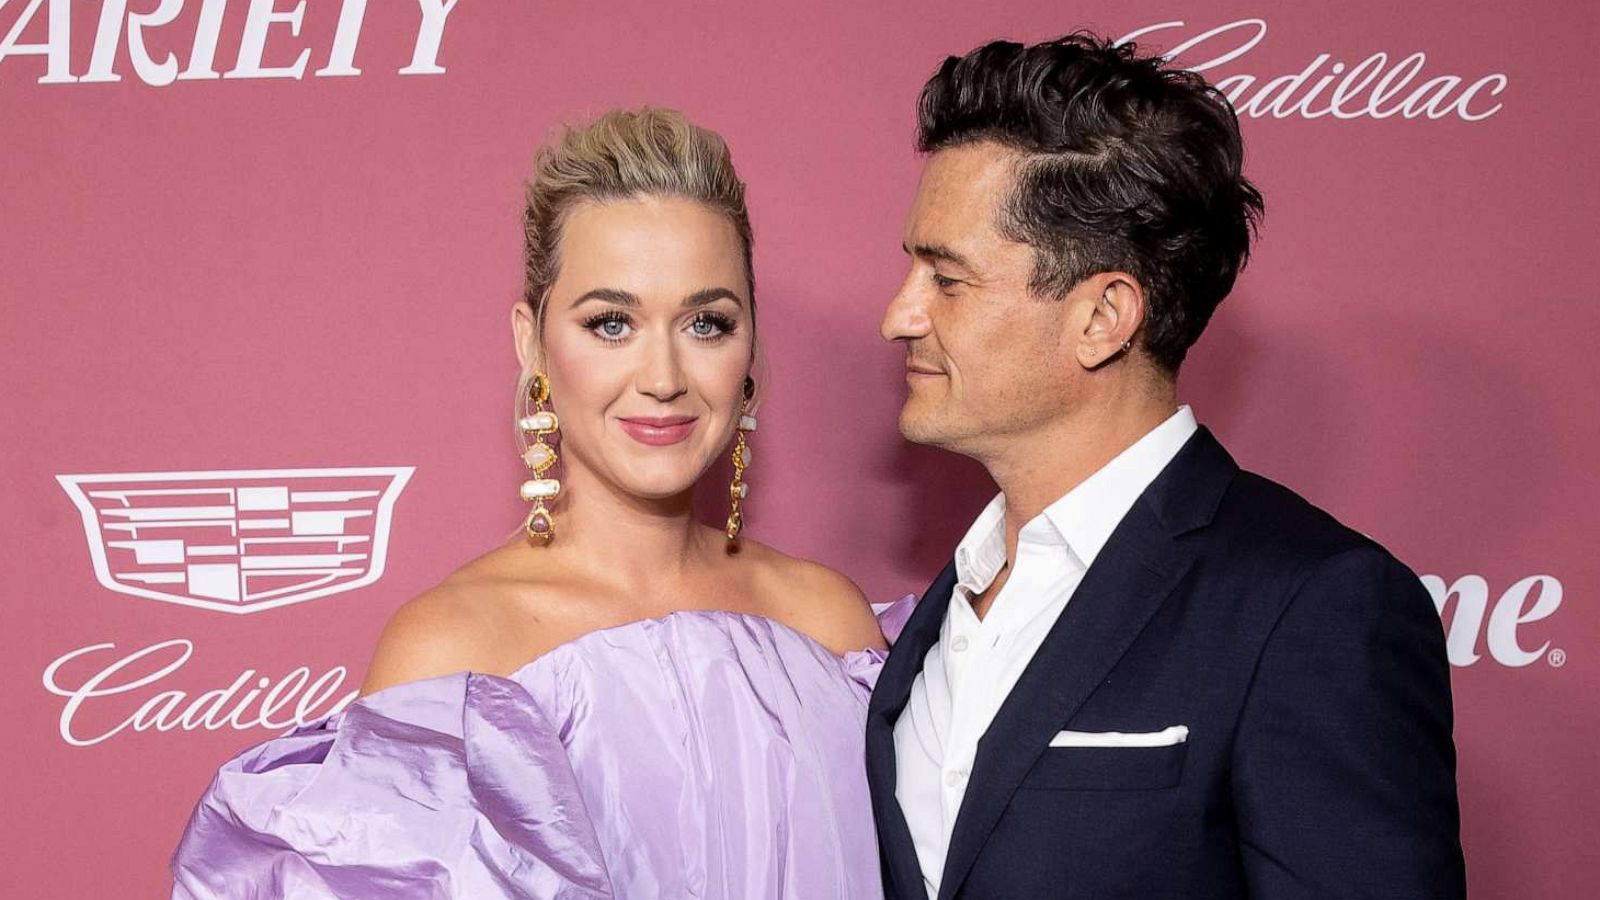 PHOTO: In this Sept. 30, 2021 file photo Katy Perry and Orlando Bloom arrive at Variety's Power of Women event in Los Angeles.